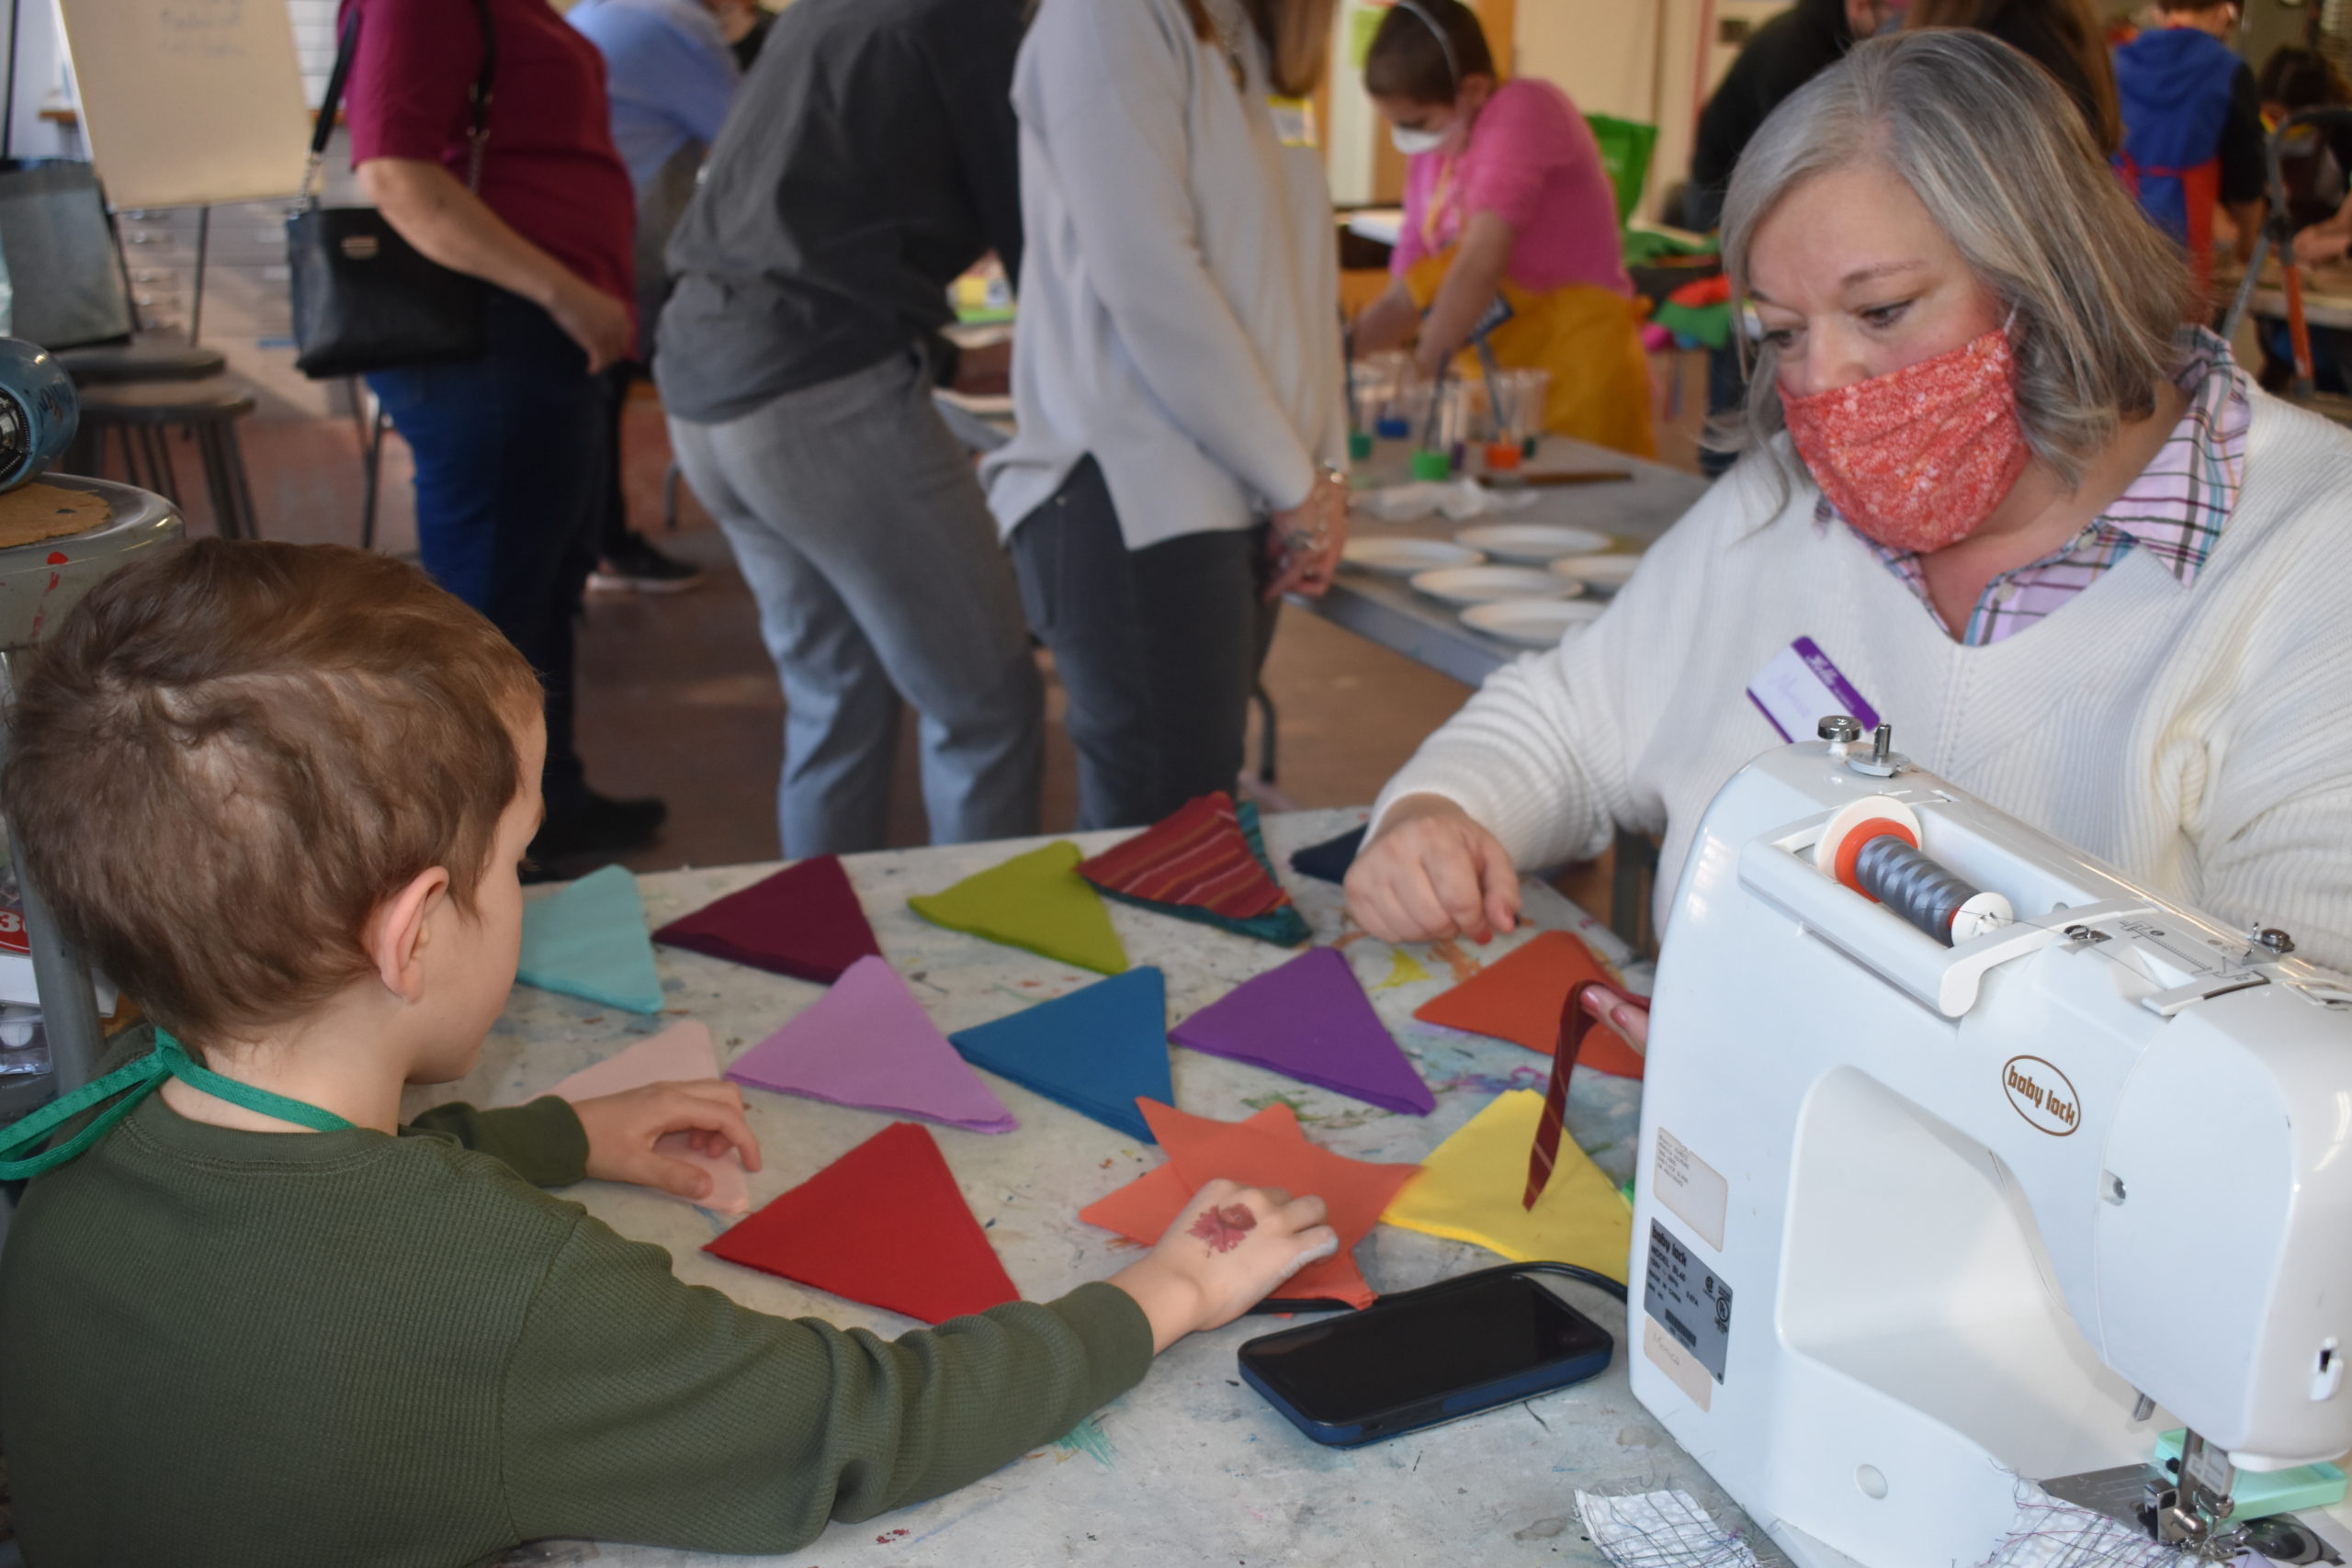 A woman showing a child how to piece together a quilt on a sewing machine